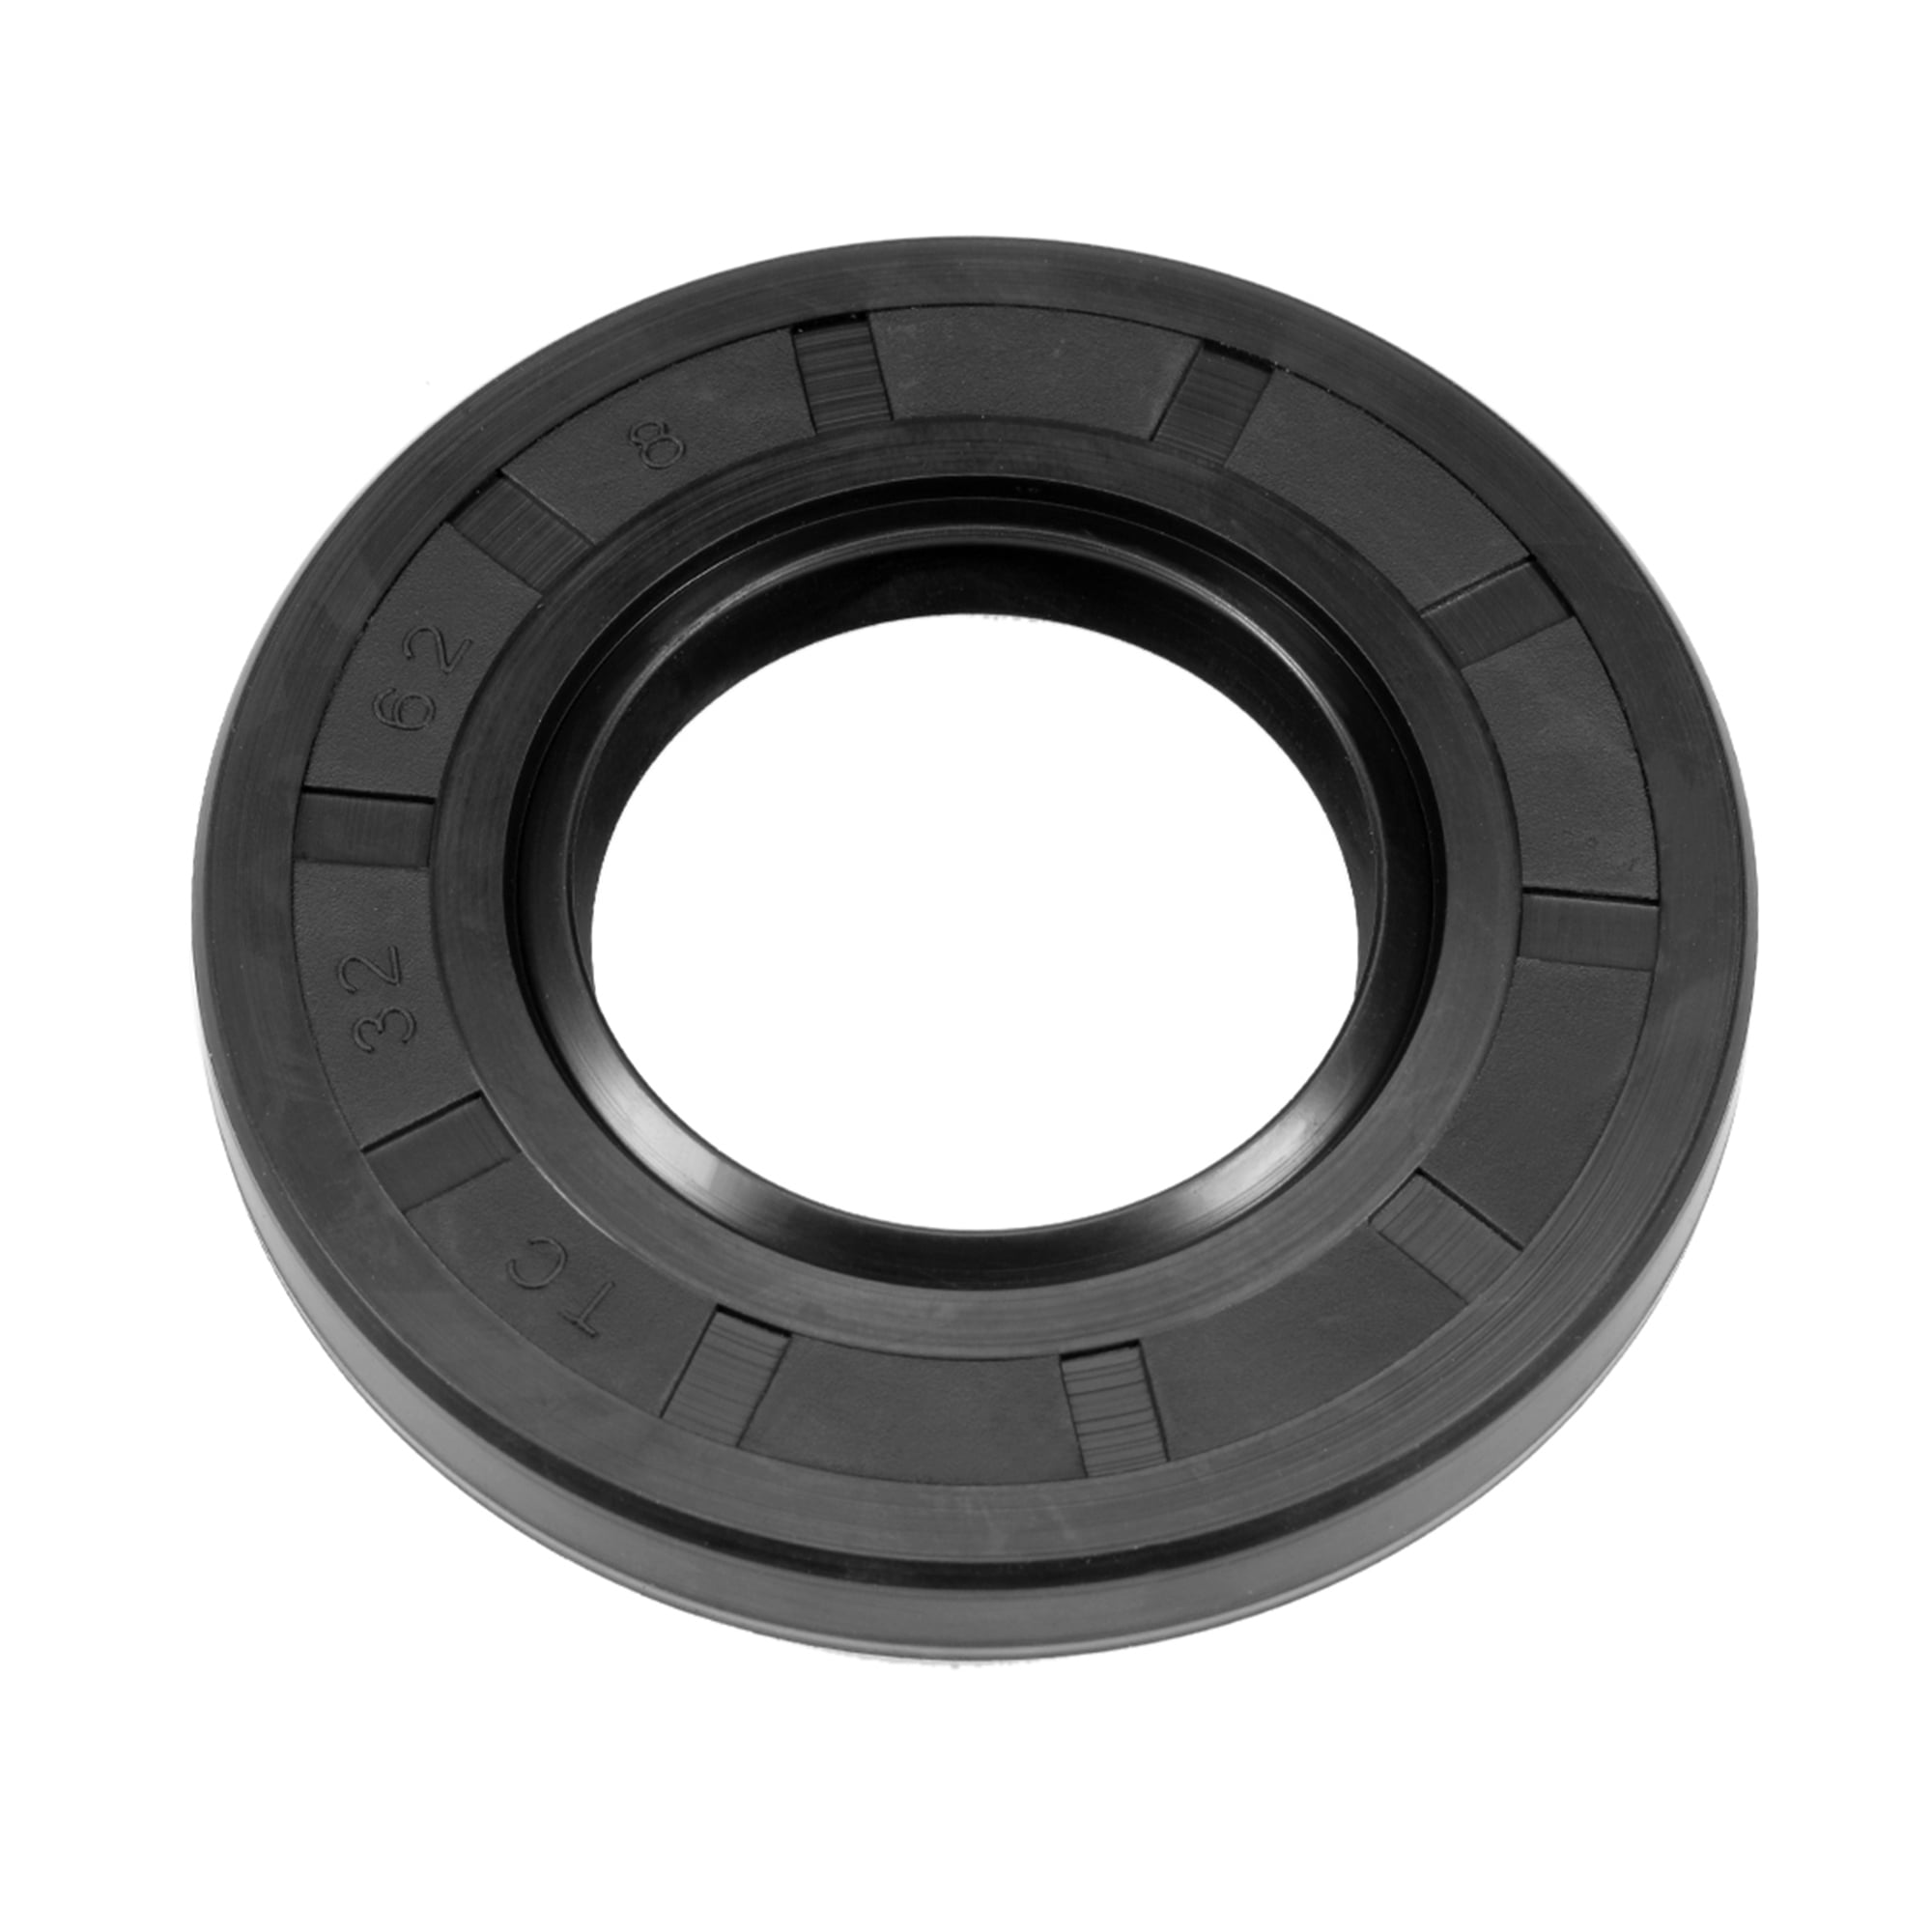 Oil Seal Size 15mm X 40mm X 10mm 2 Pack 